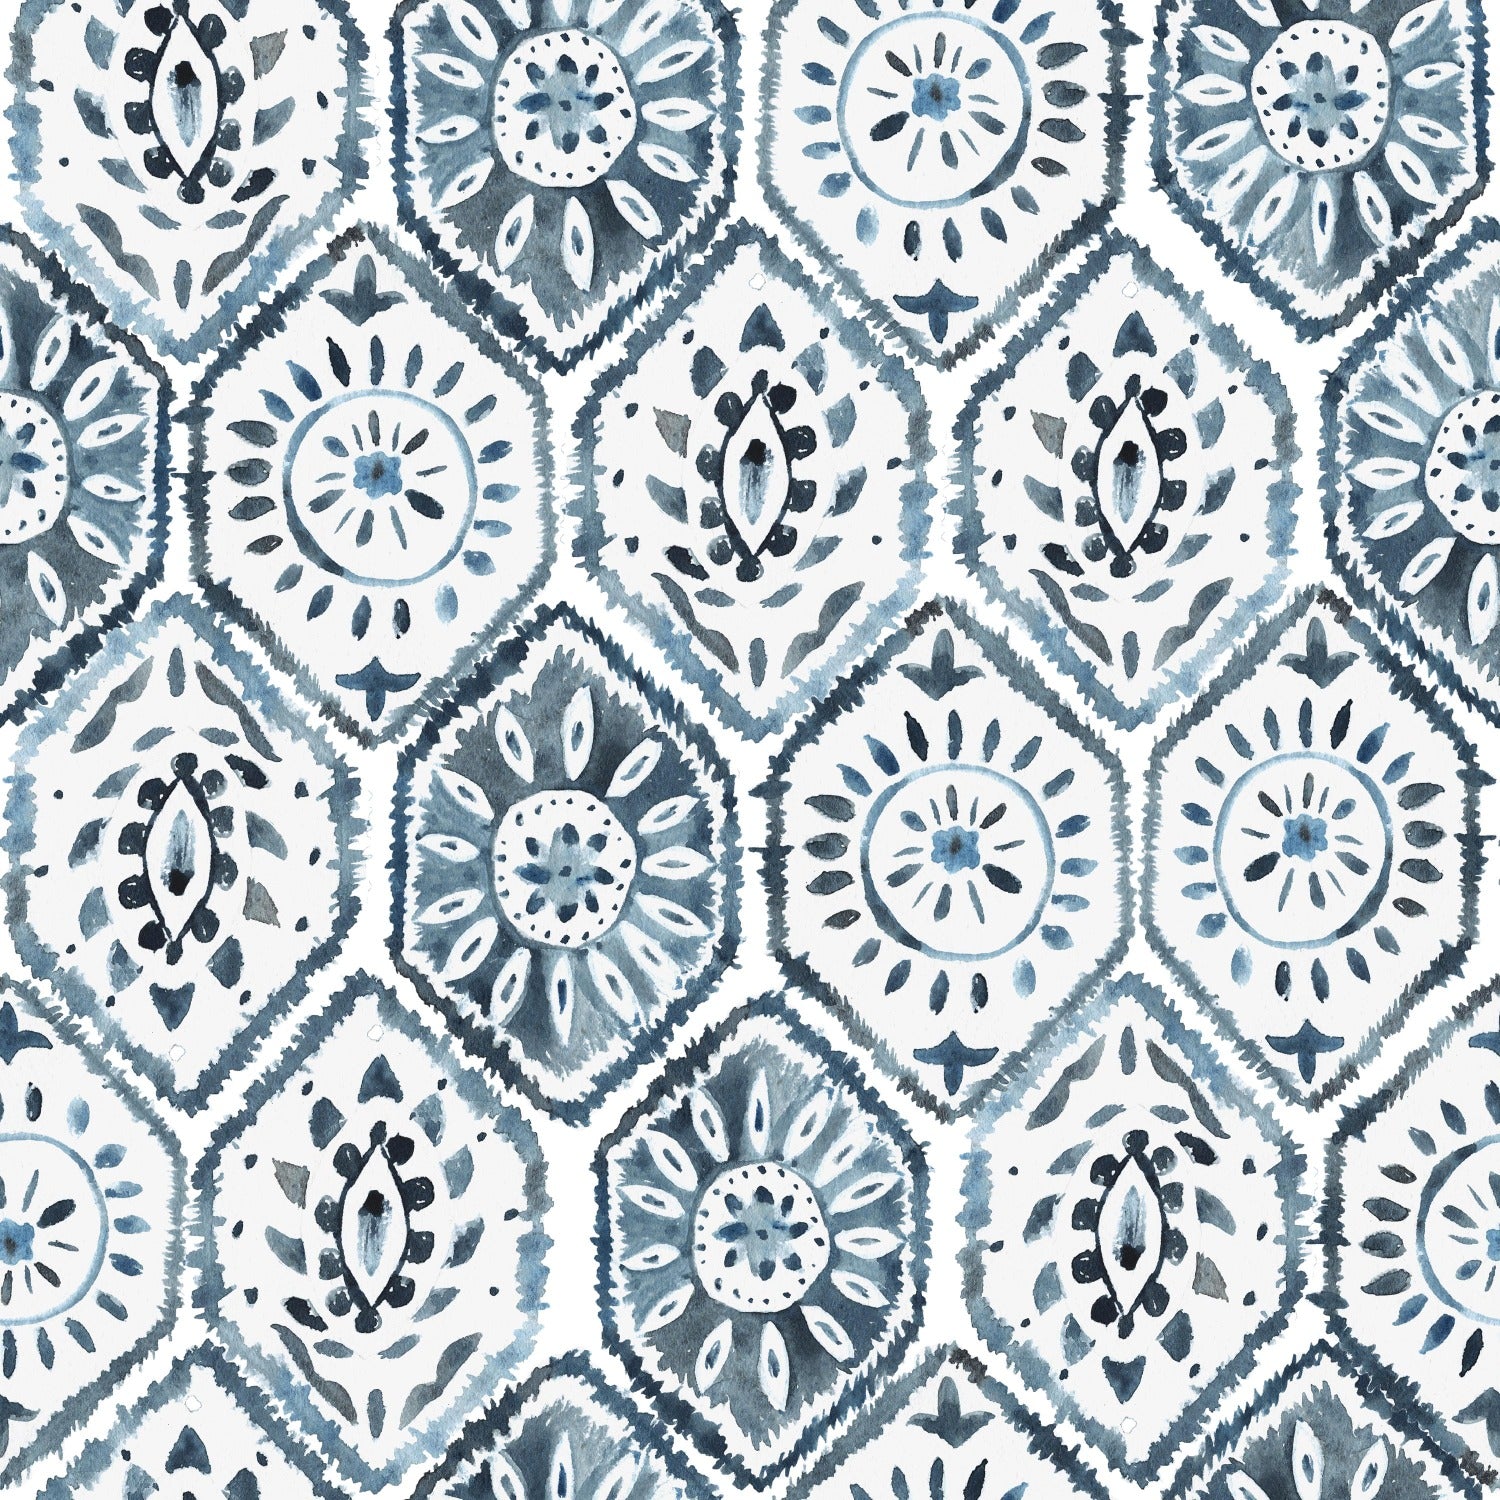 Close-up of a Moroccan Tile patterned wallpaper in indigo blue, showcasing the intricate geometric and floral designs characteristic of Moroccan art.